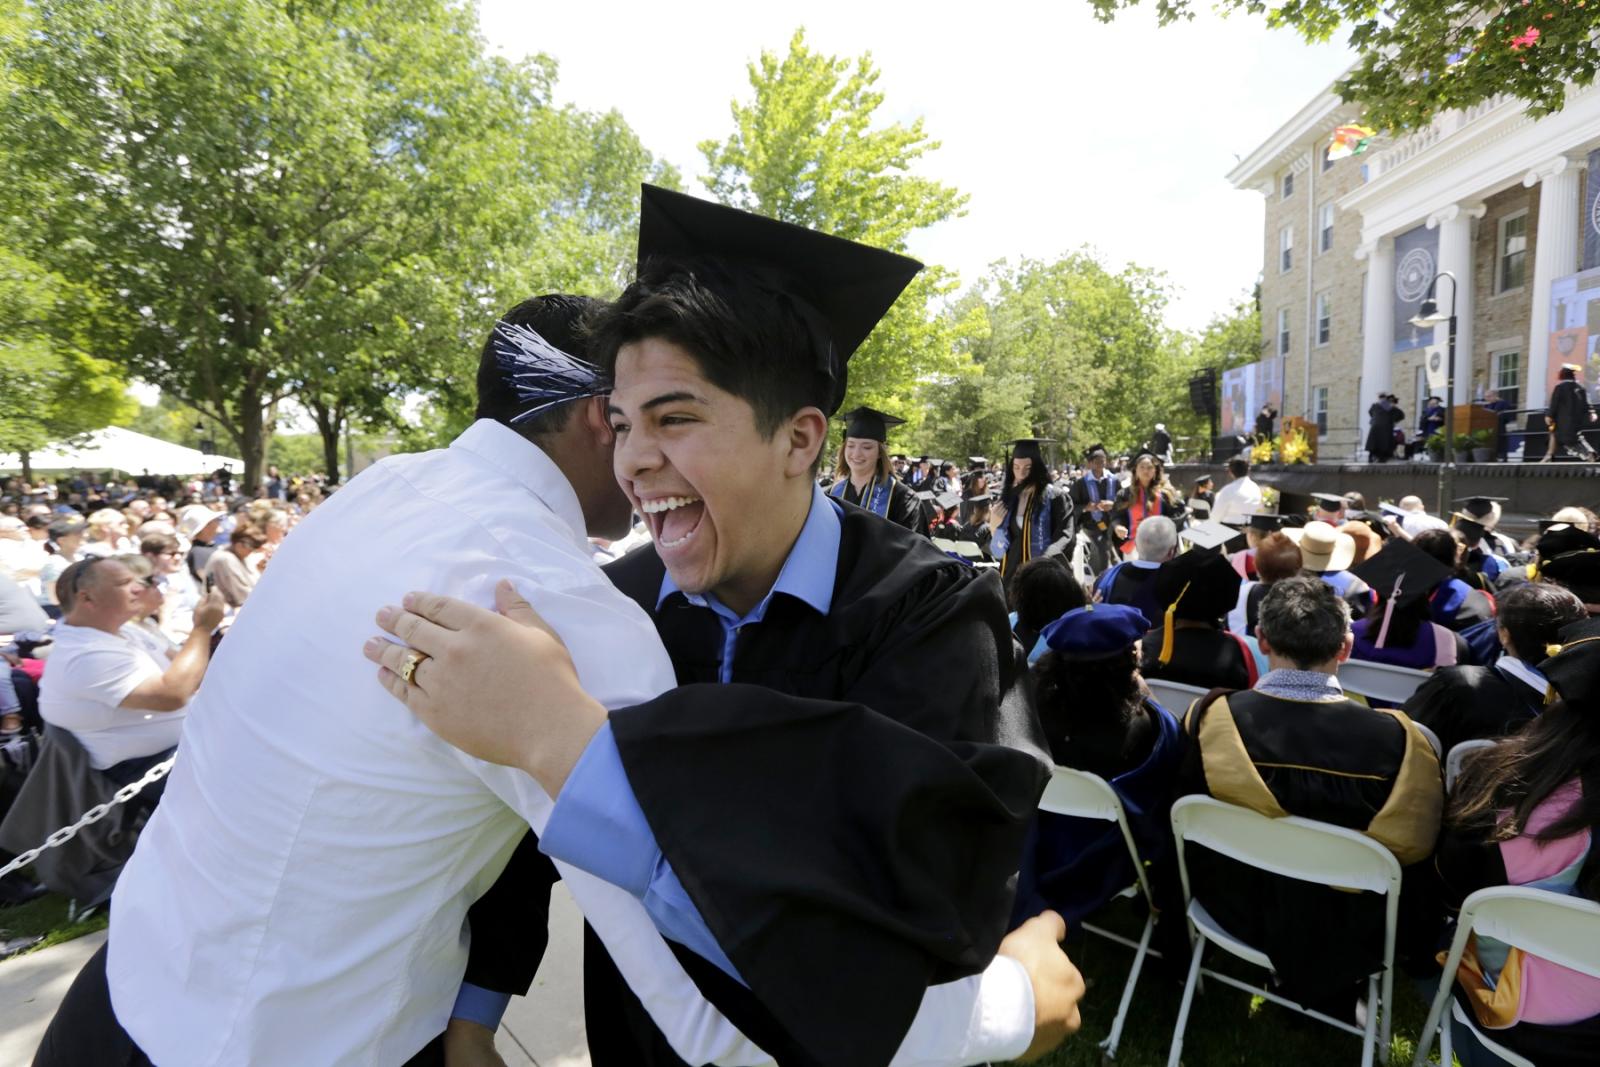 A graduate gets a hug at Commencement.